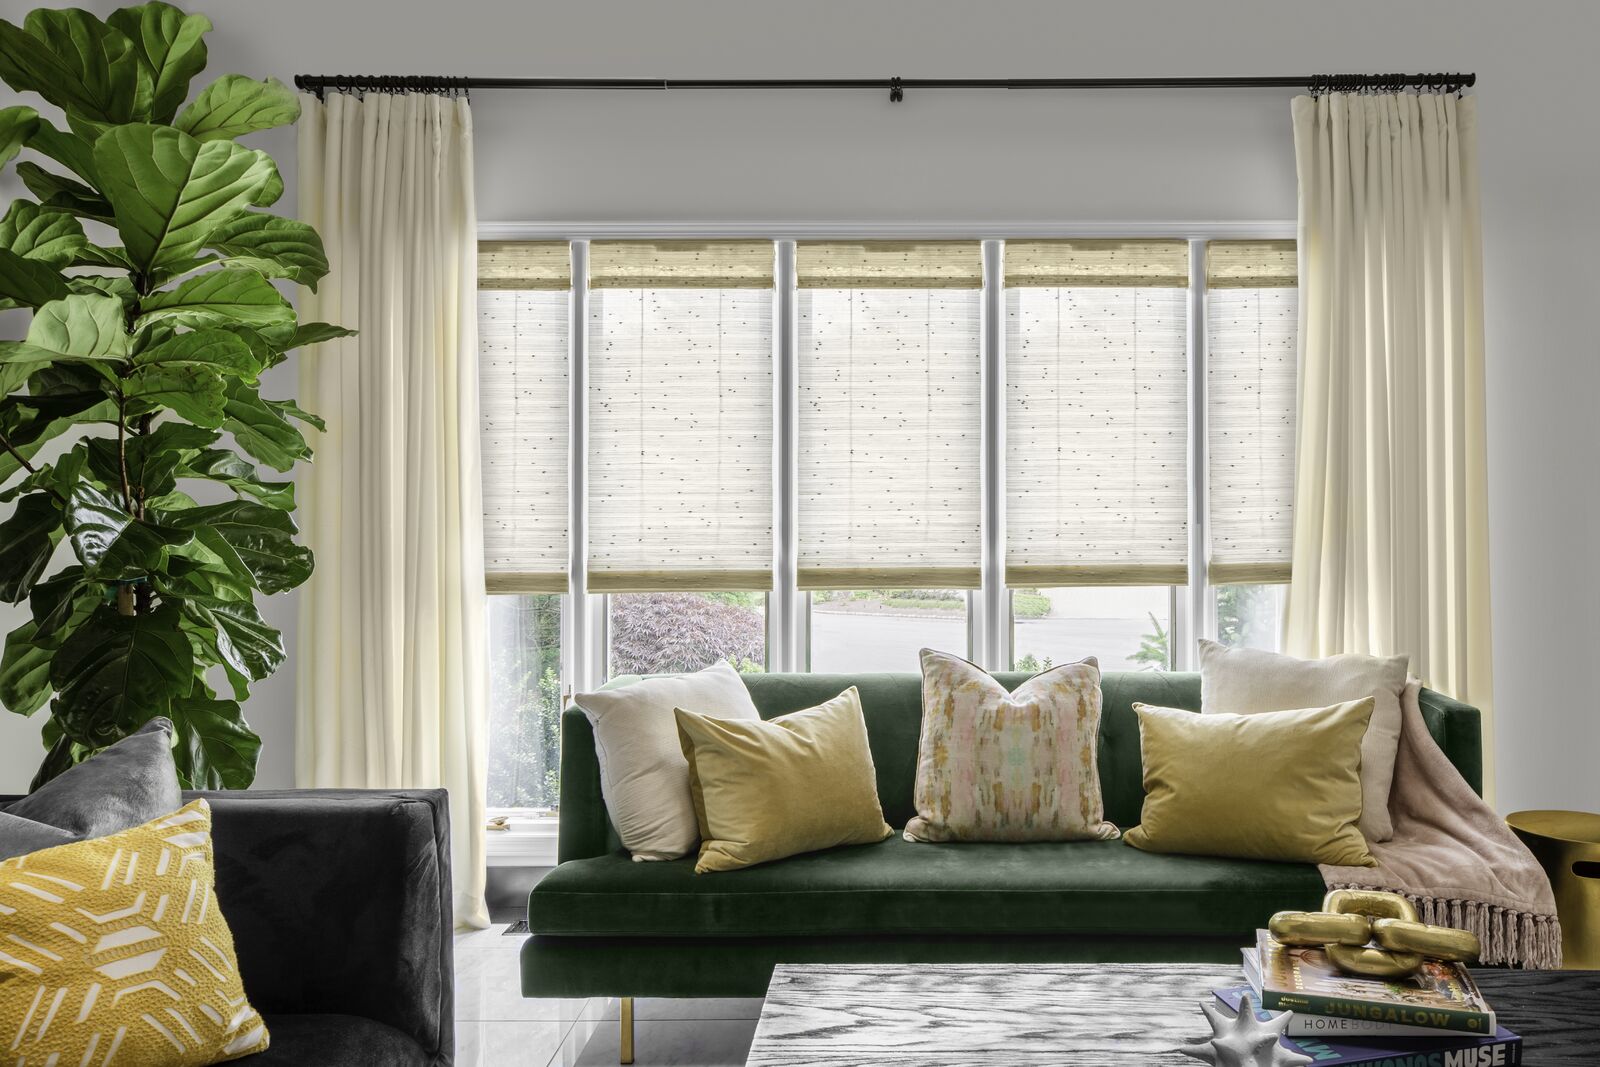 Woven wood shades in the closed position allow light to pour into a living room.